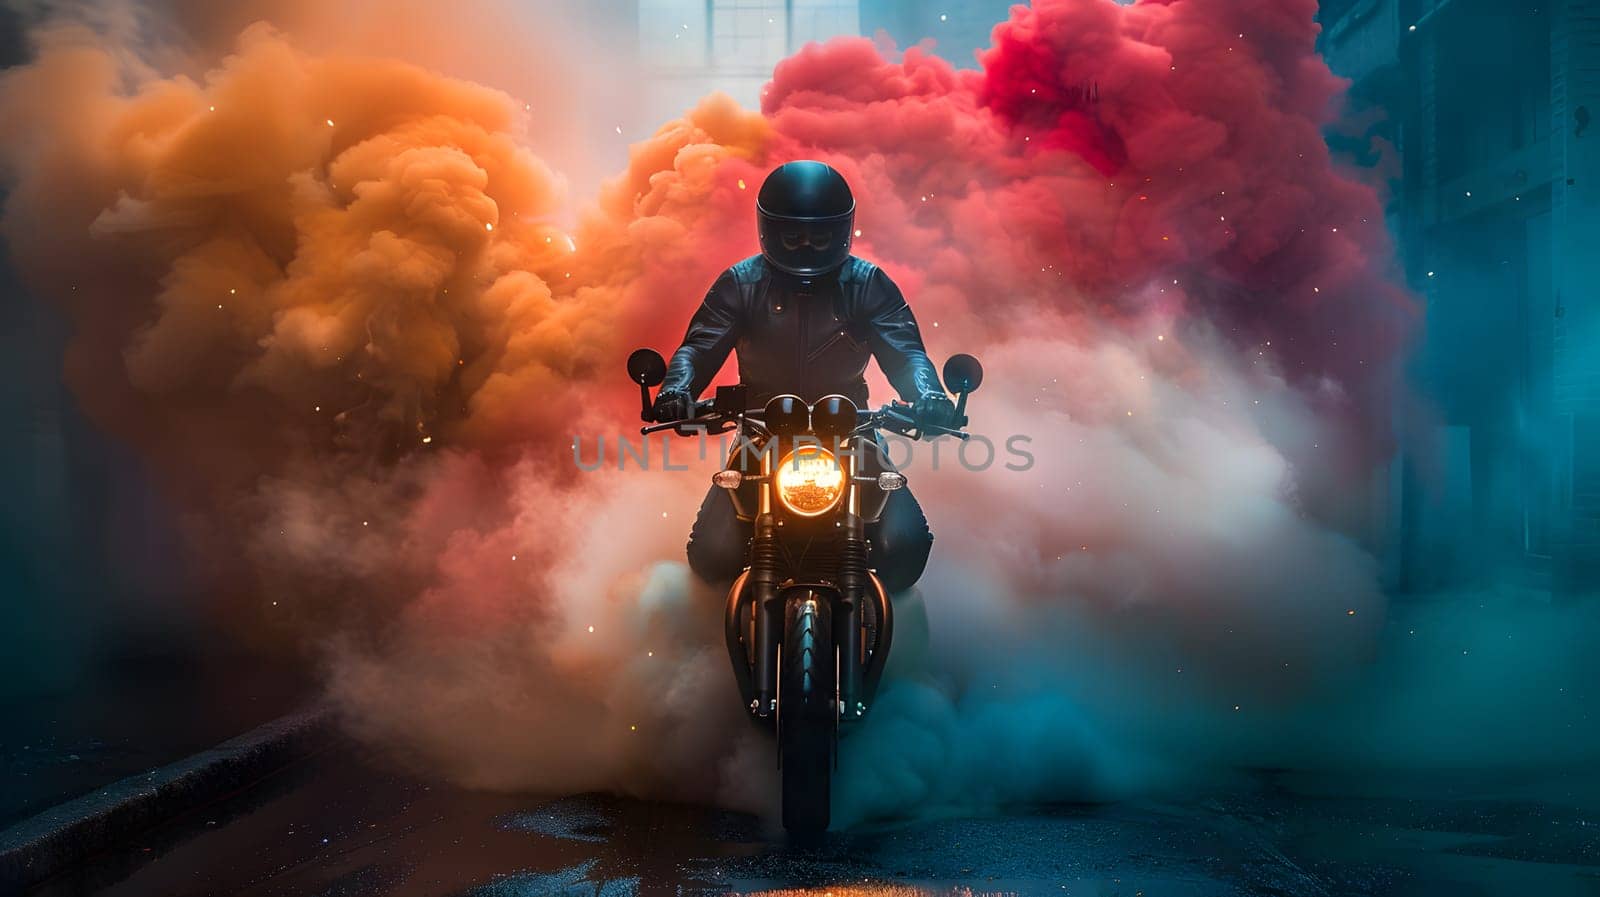 Man on motorcycle rides through smoke cloud under atmospheric sky by Nadtochiy